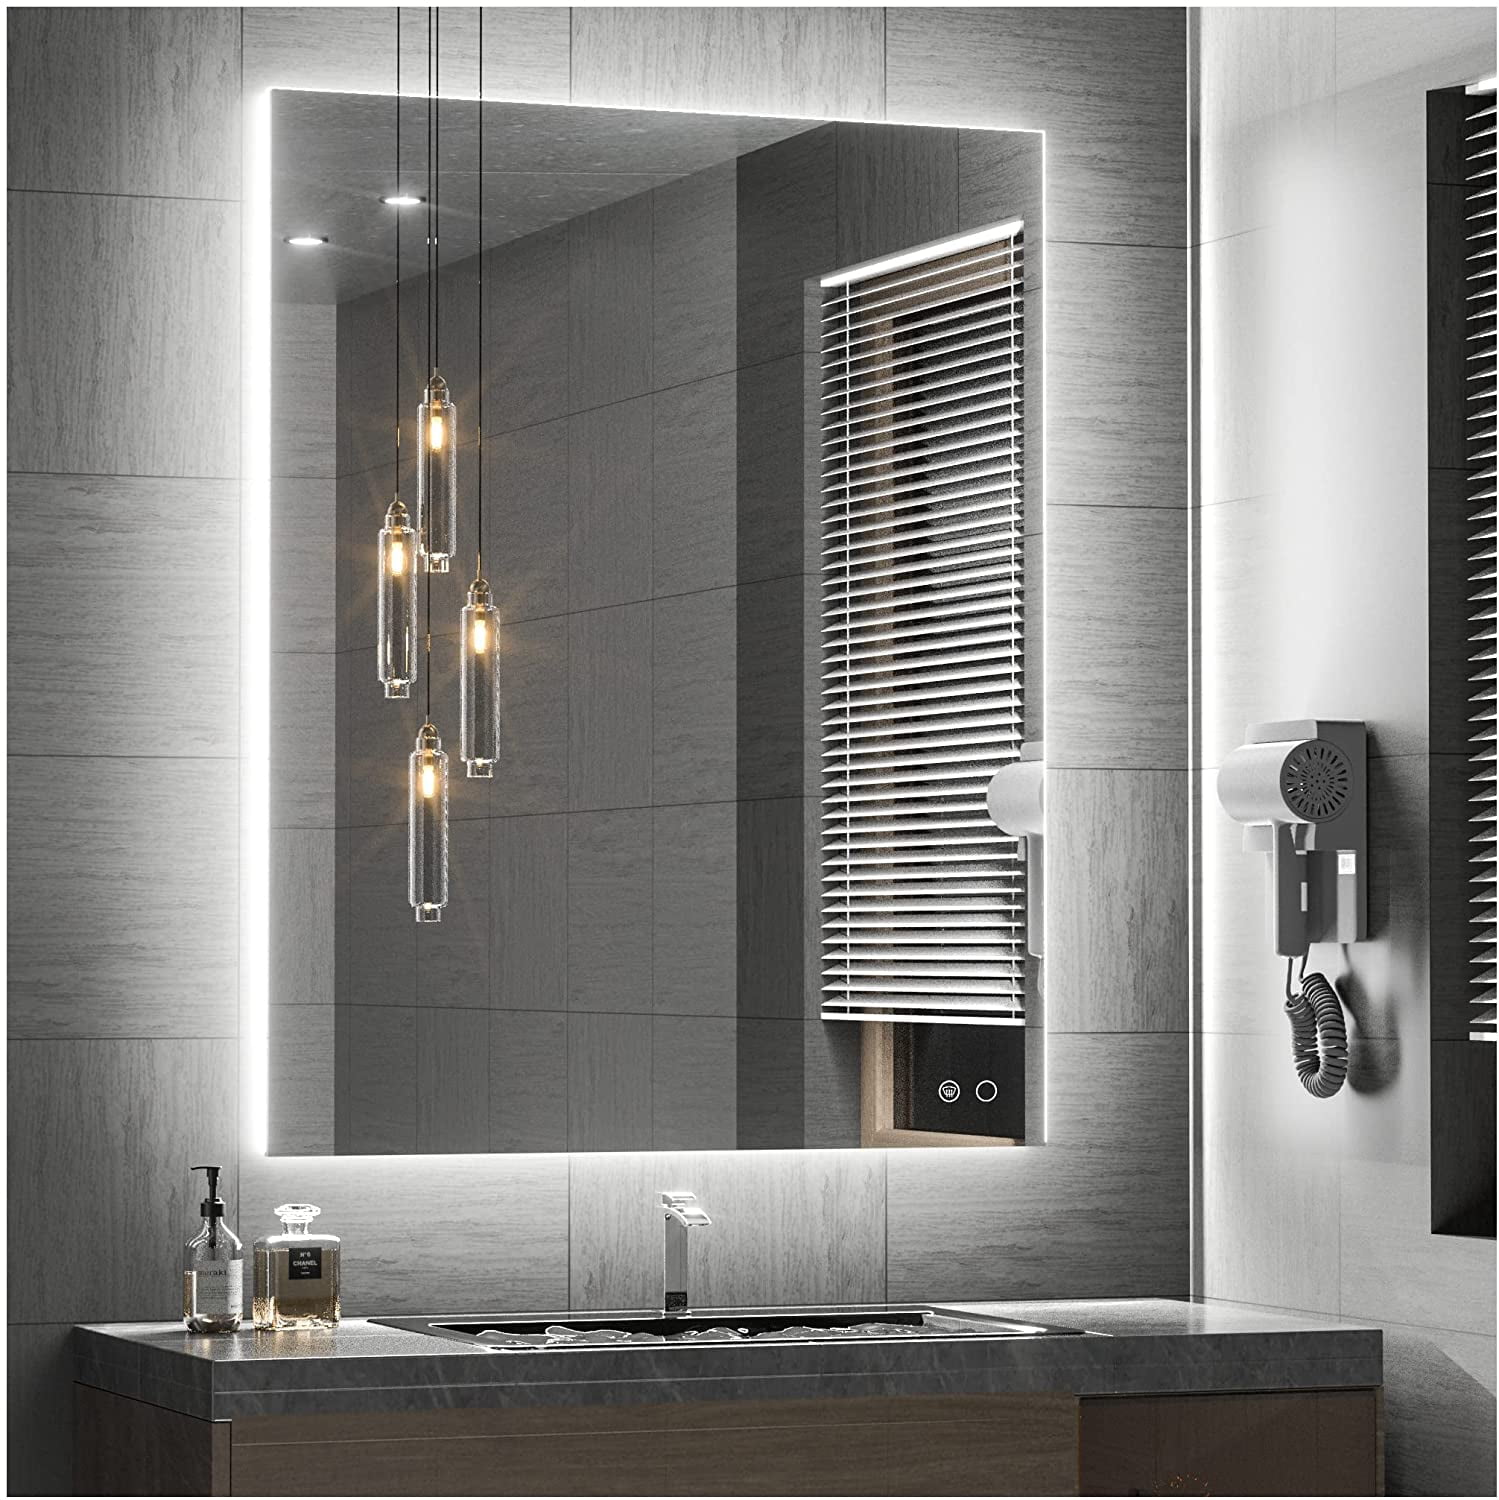 Details about   Led Wall Light Fixture Plug In Indoor Picture Vanity Bathroom Over Mirror Modern 